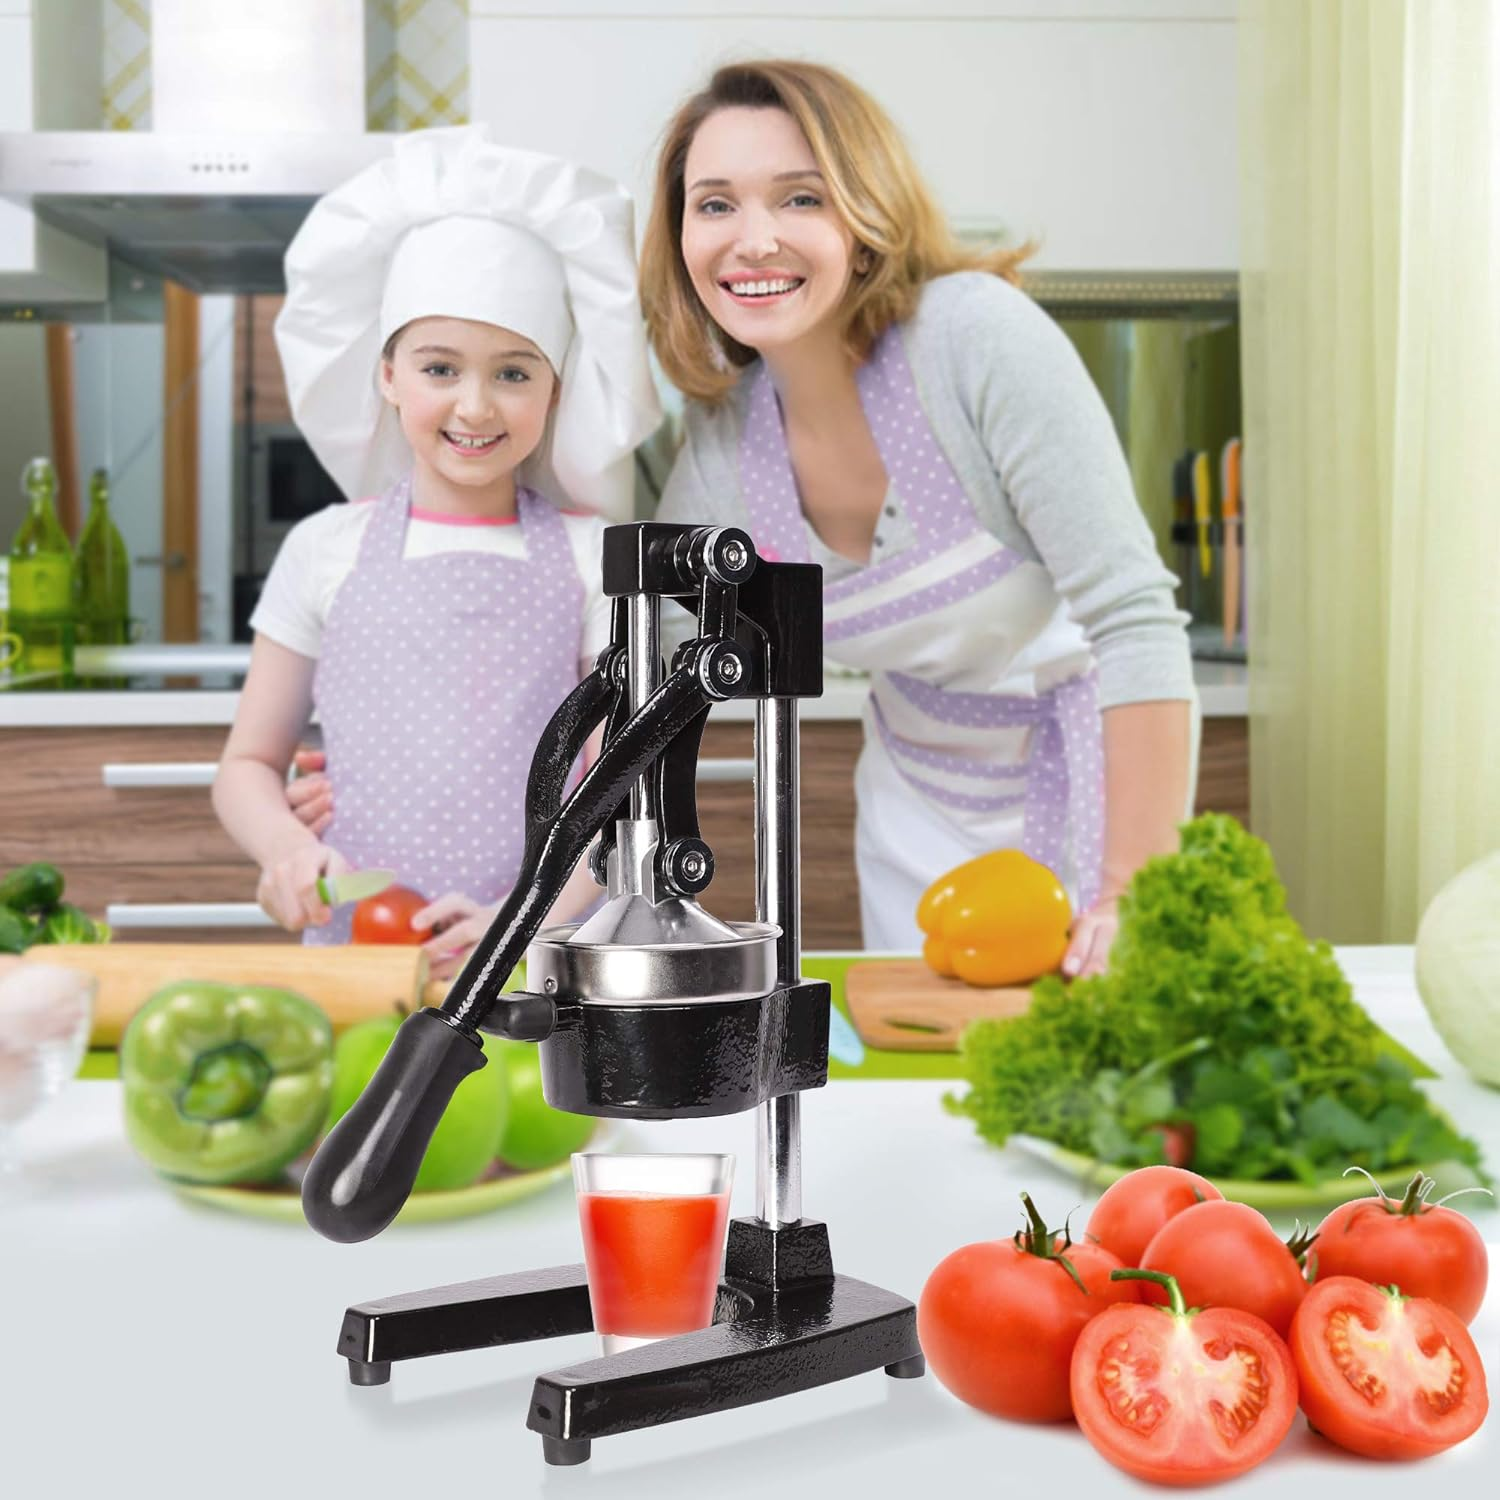 Juicer Labor-saving Manual Commercial Juicer Press Fruit Squeezer with Stable Non-slip Base, Black